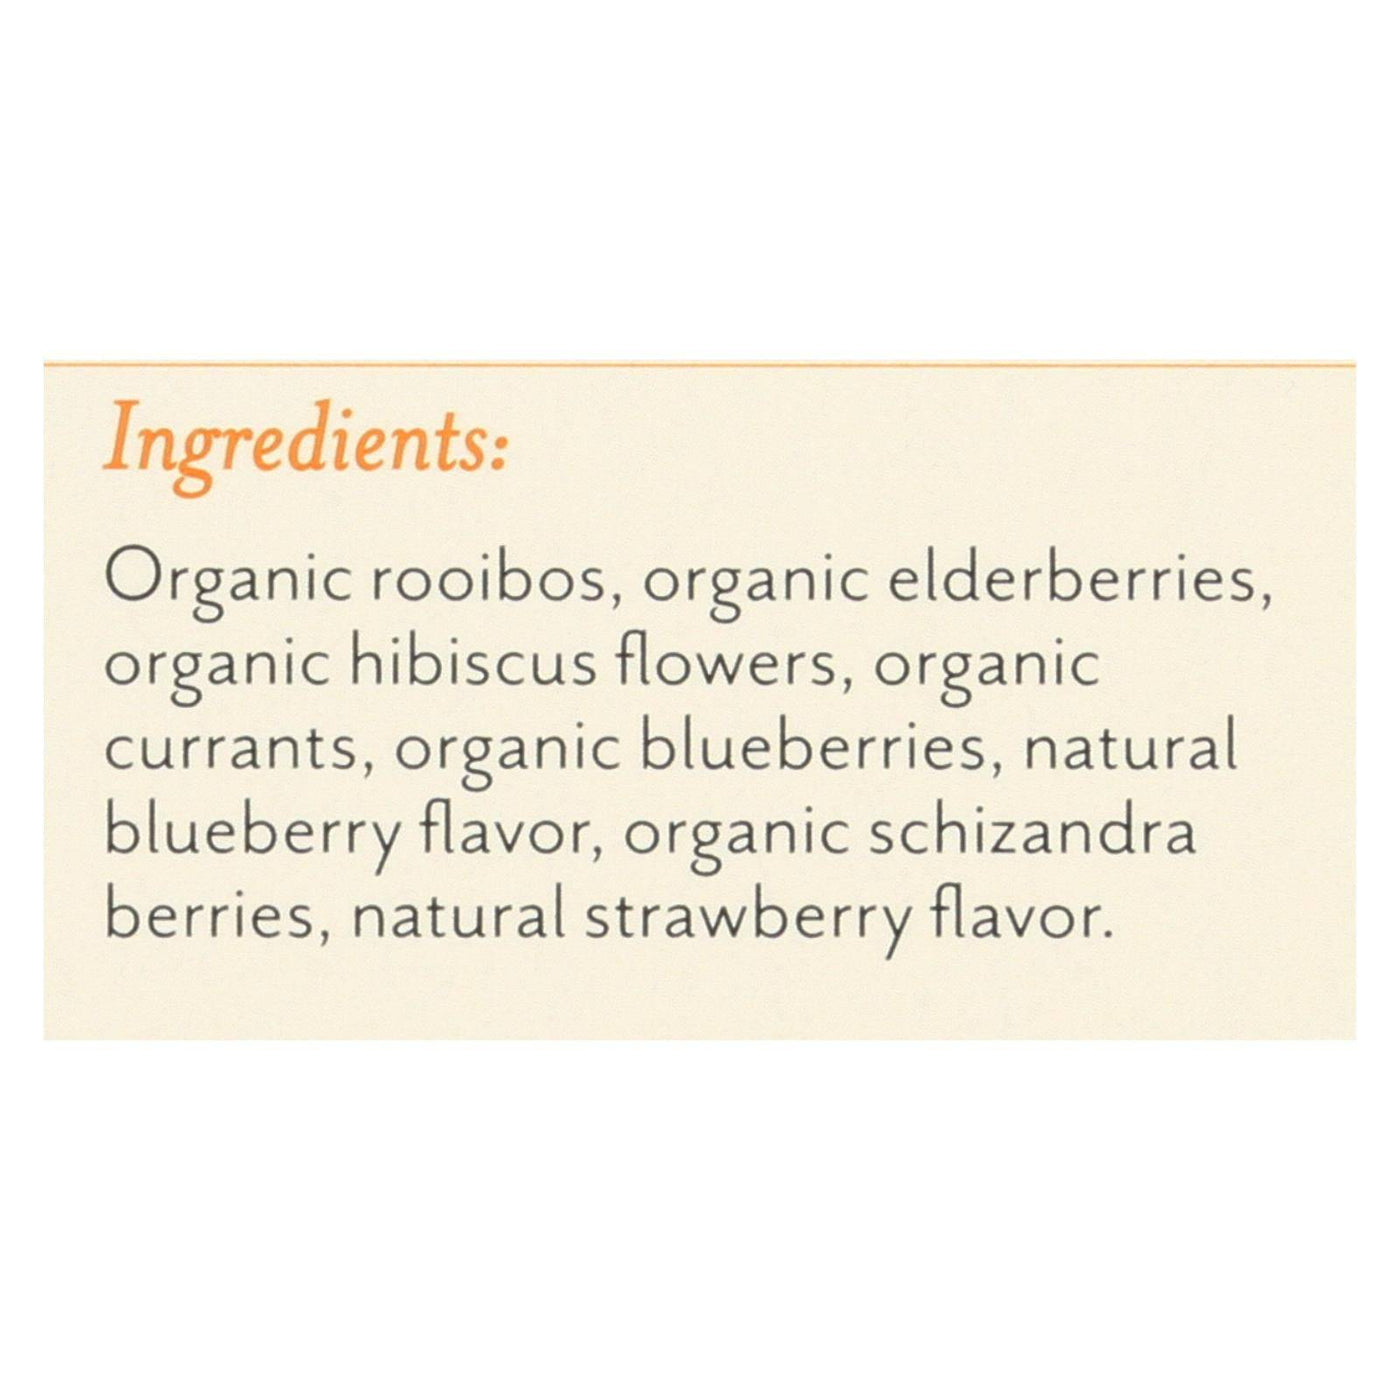 Buy Rishi Organic Tea - Blueberry Hibiscus - Case Of 6 - 15 Bags  at OnlyNaturals.us